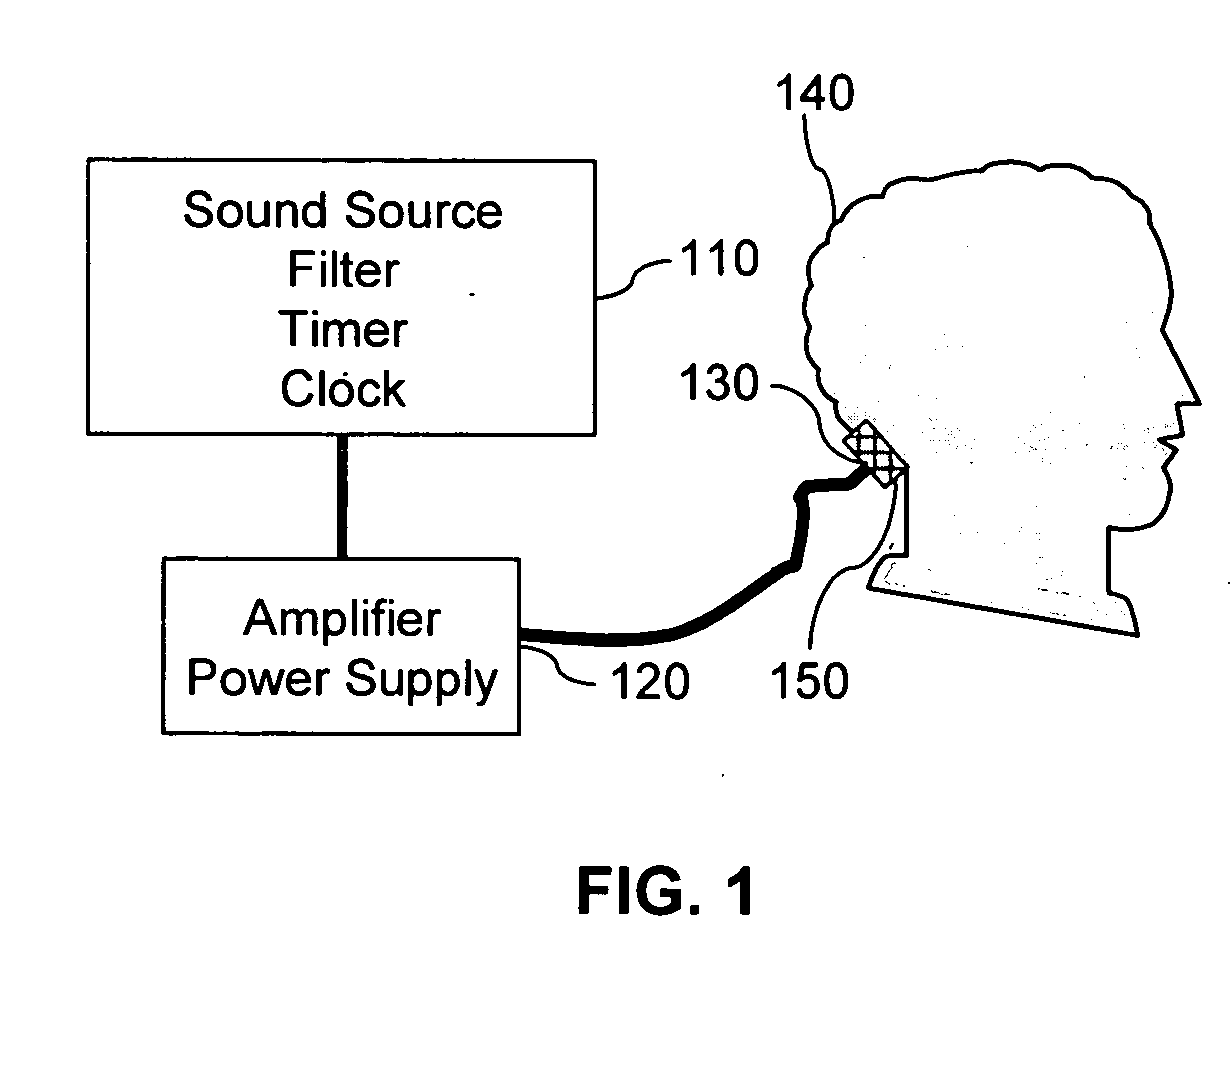 Method and apparatus for improving hearing in patients suffering from hearing loss